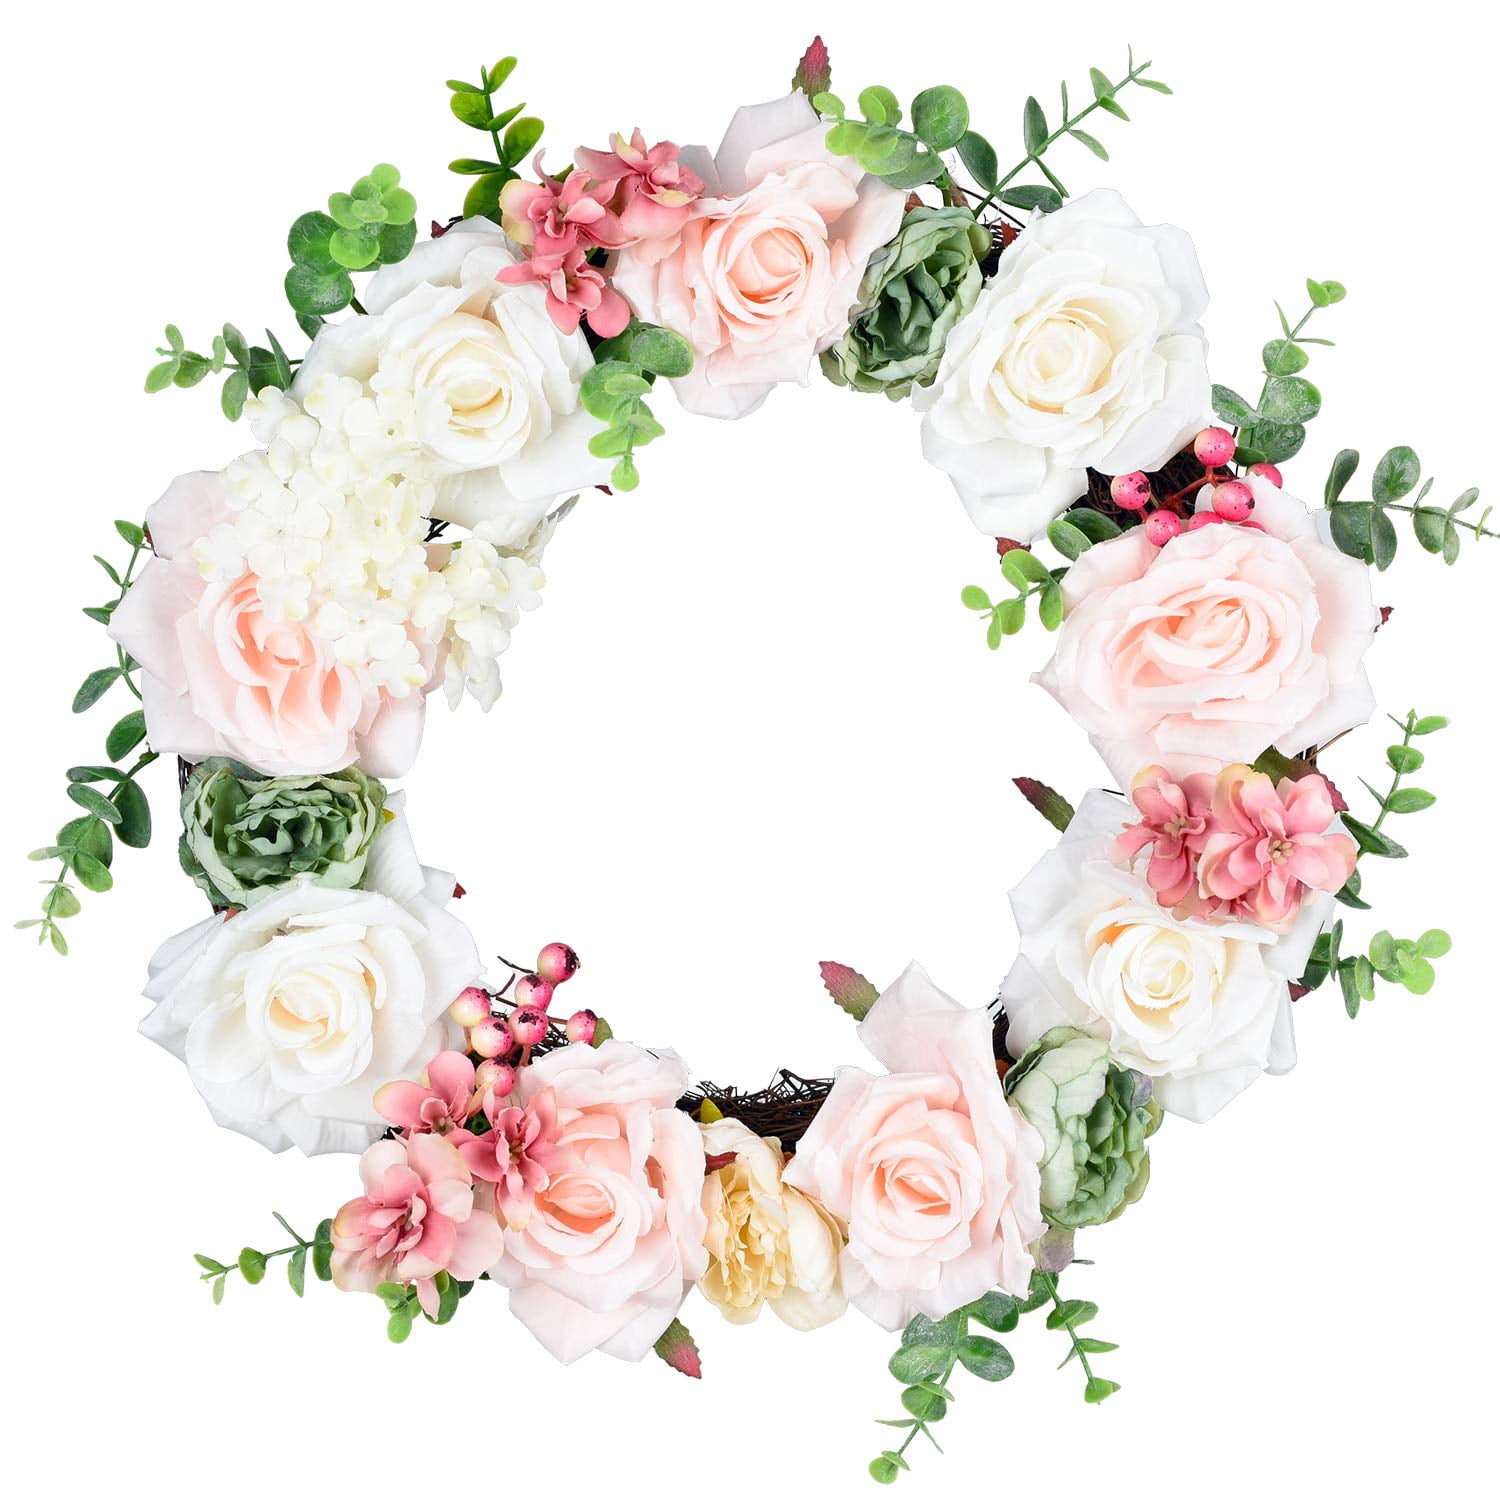 FLAMEER Pair of Handmade Rose Floral Twig Wreath 13 Inch Artificial Heart Shaped Flowers Garland Front Door Wreath Wedding Party Decor Rose